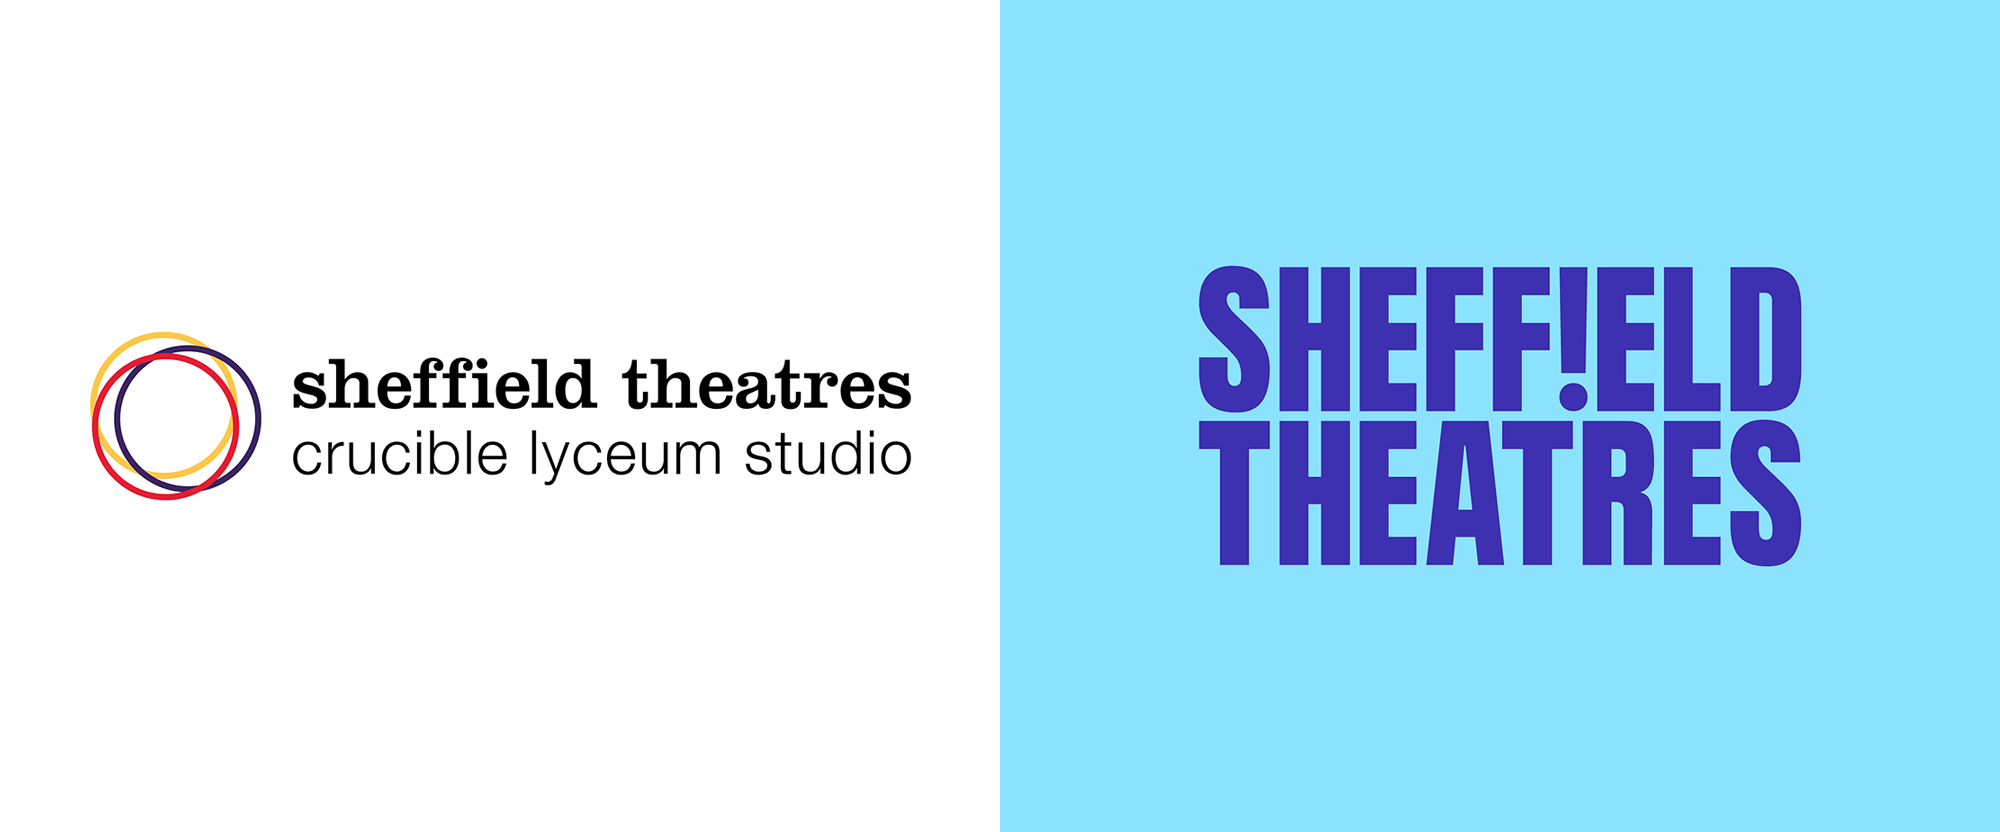 New Logo and Identity for Sheffield Theatres by Cafeteria